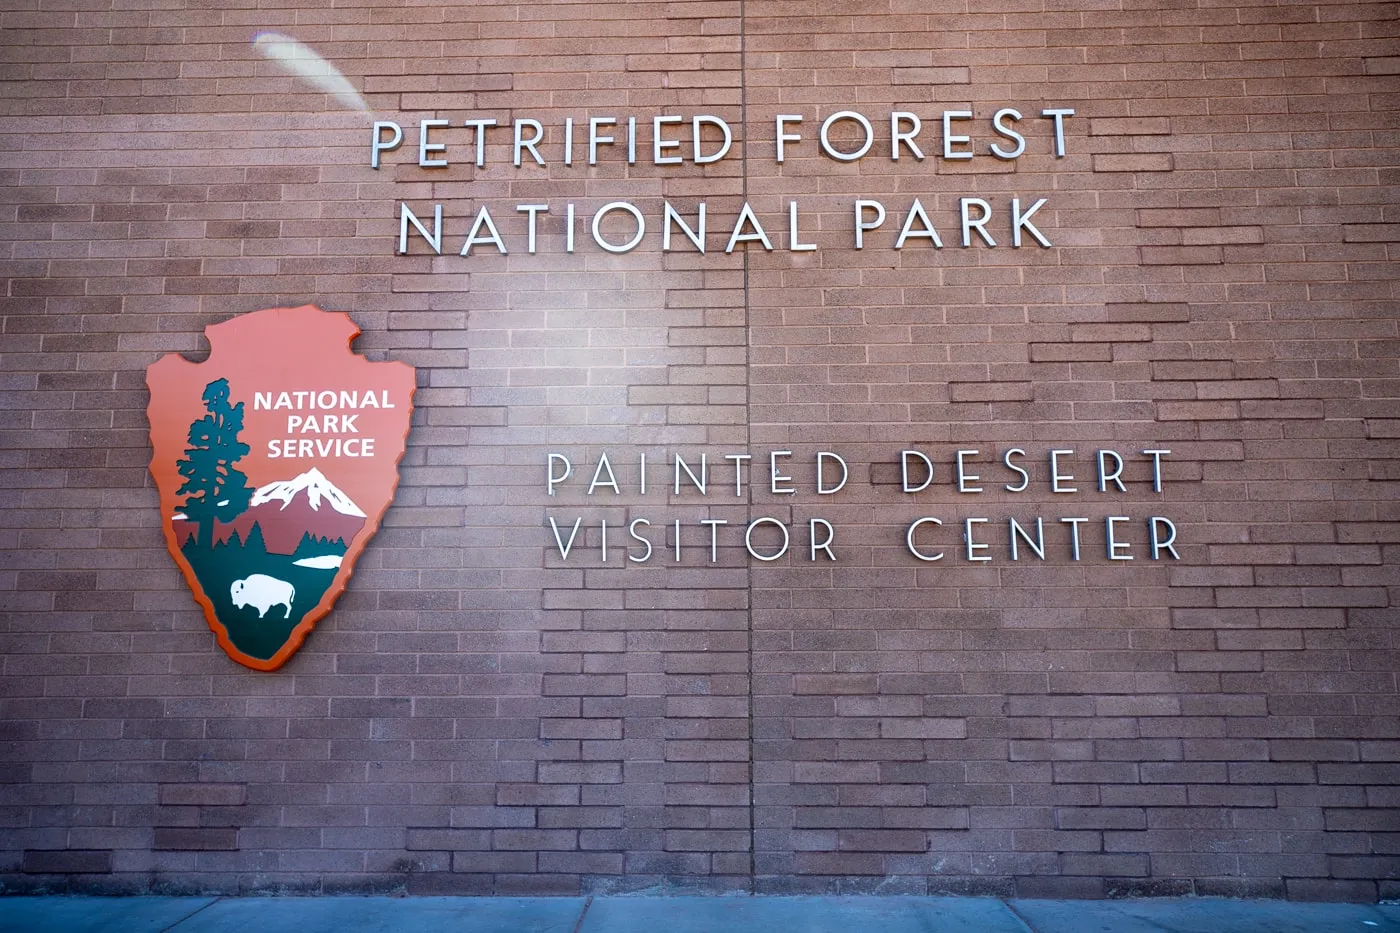 Petrified Forest National Park in Arizona - Painted Desert Visitor Center